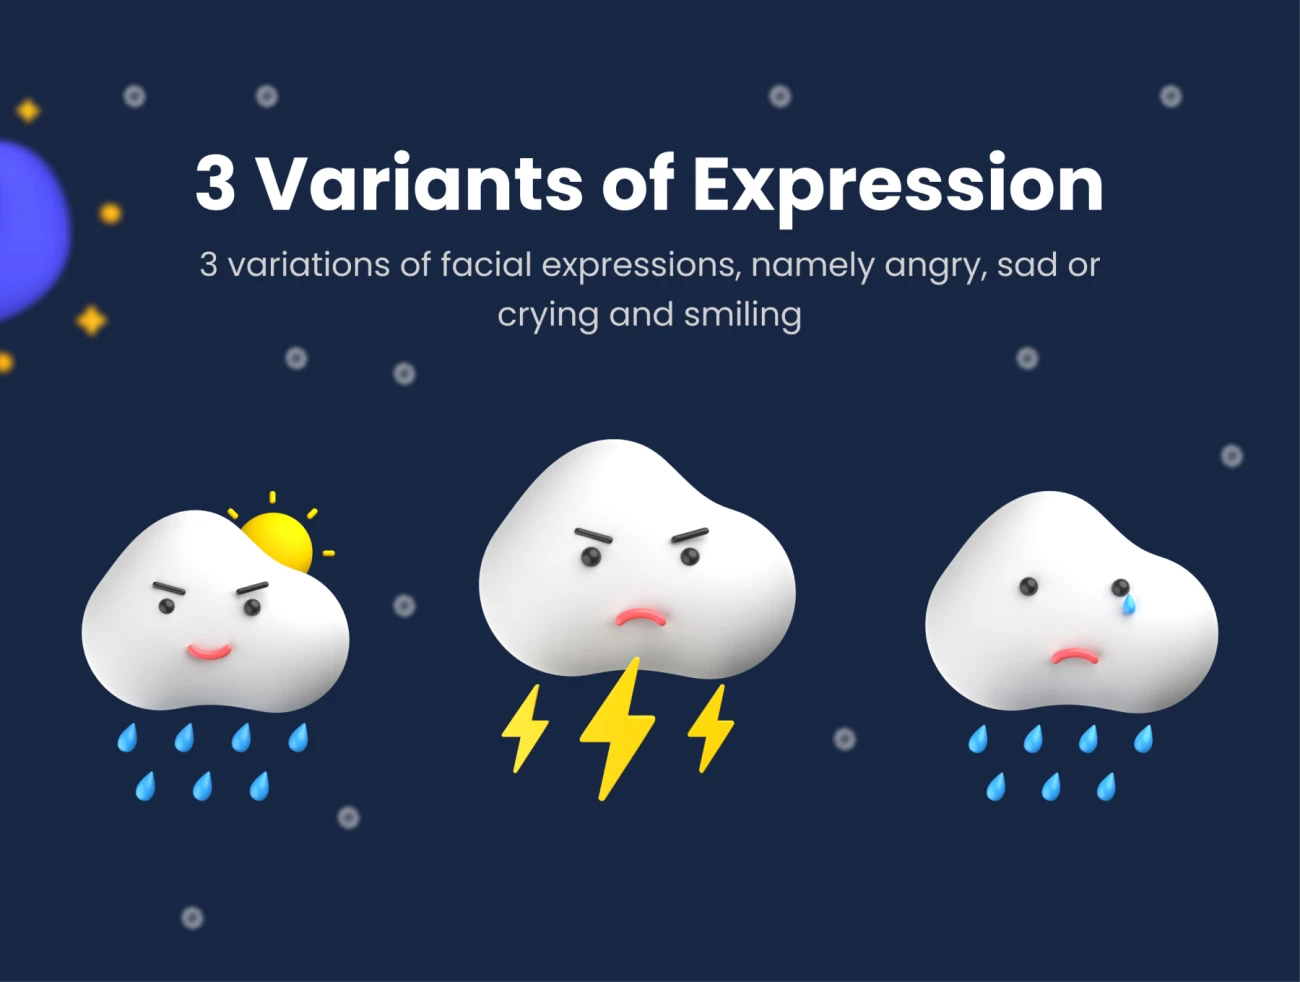 3D拟人情绪化天气图标24款素材下载 3D Weather Icons Emoticons Pack .figma .png .psd插图5